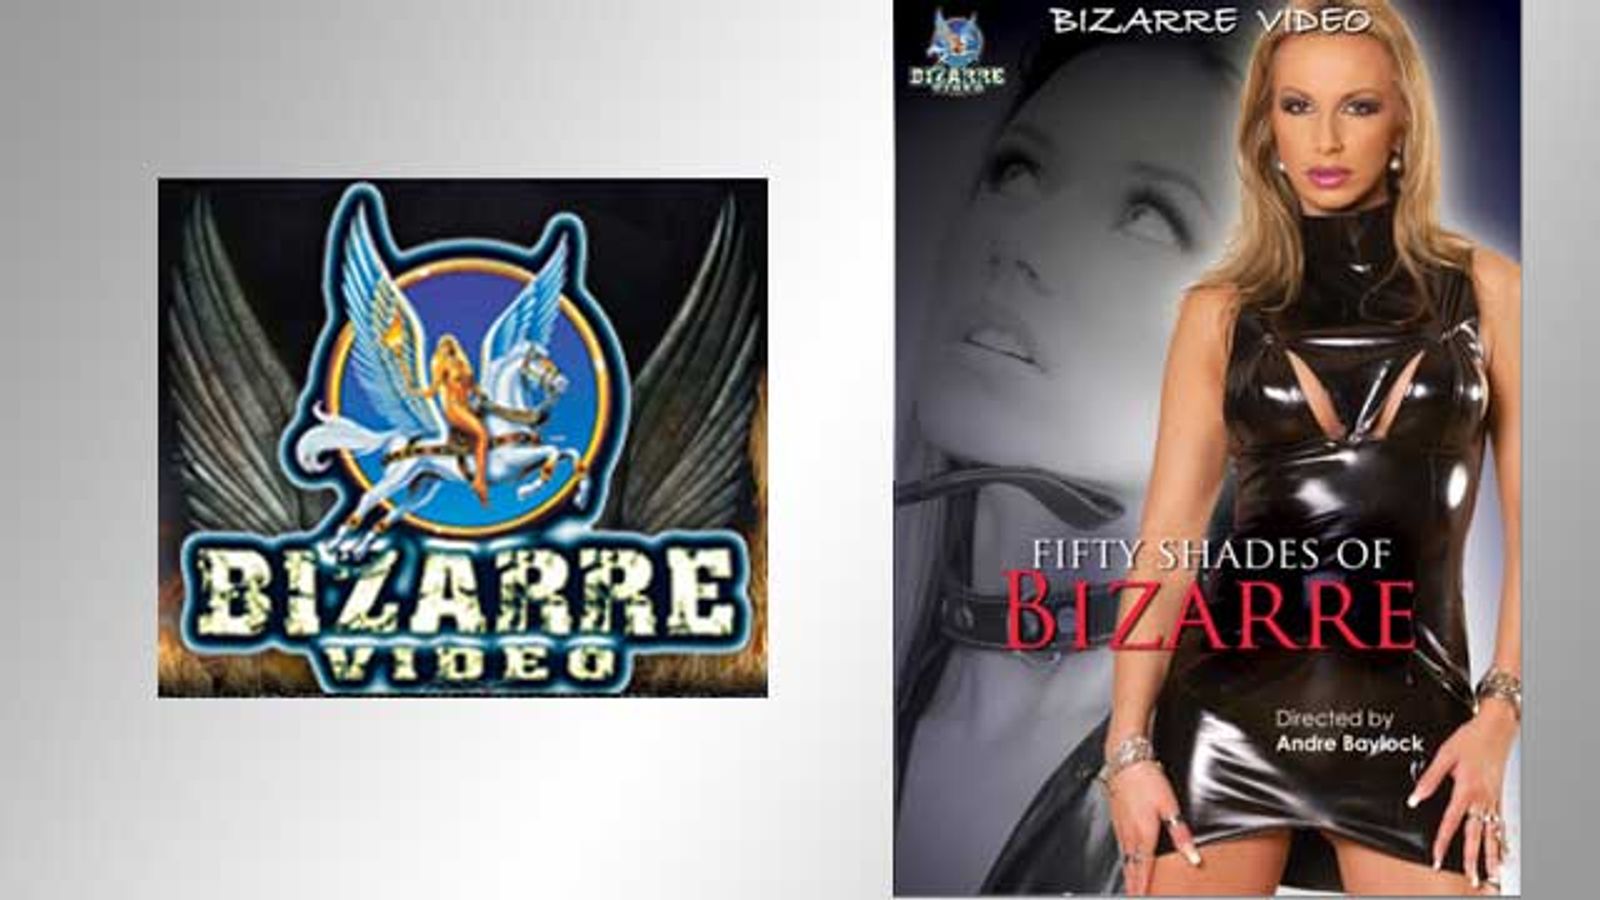 Bizarre Video to Release 'Fifty Shades of Bizarre'